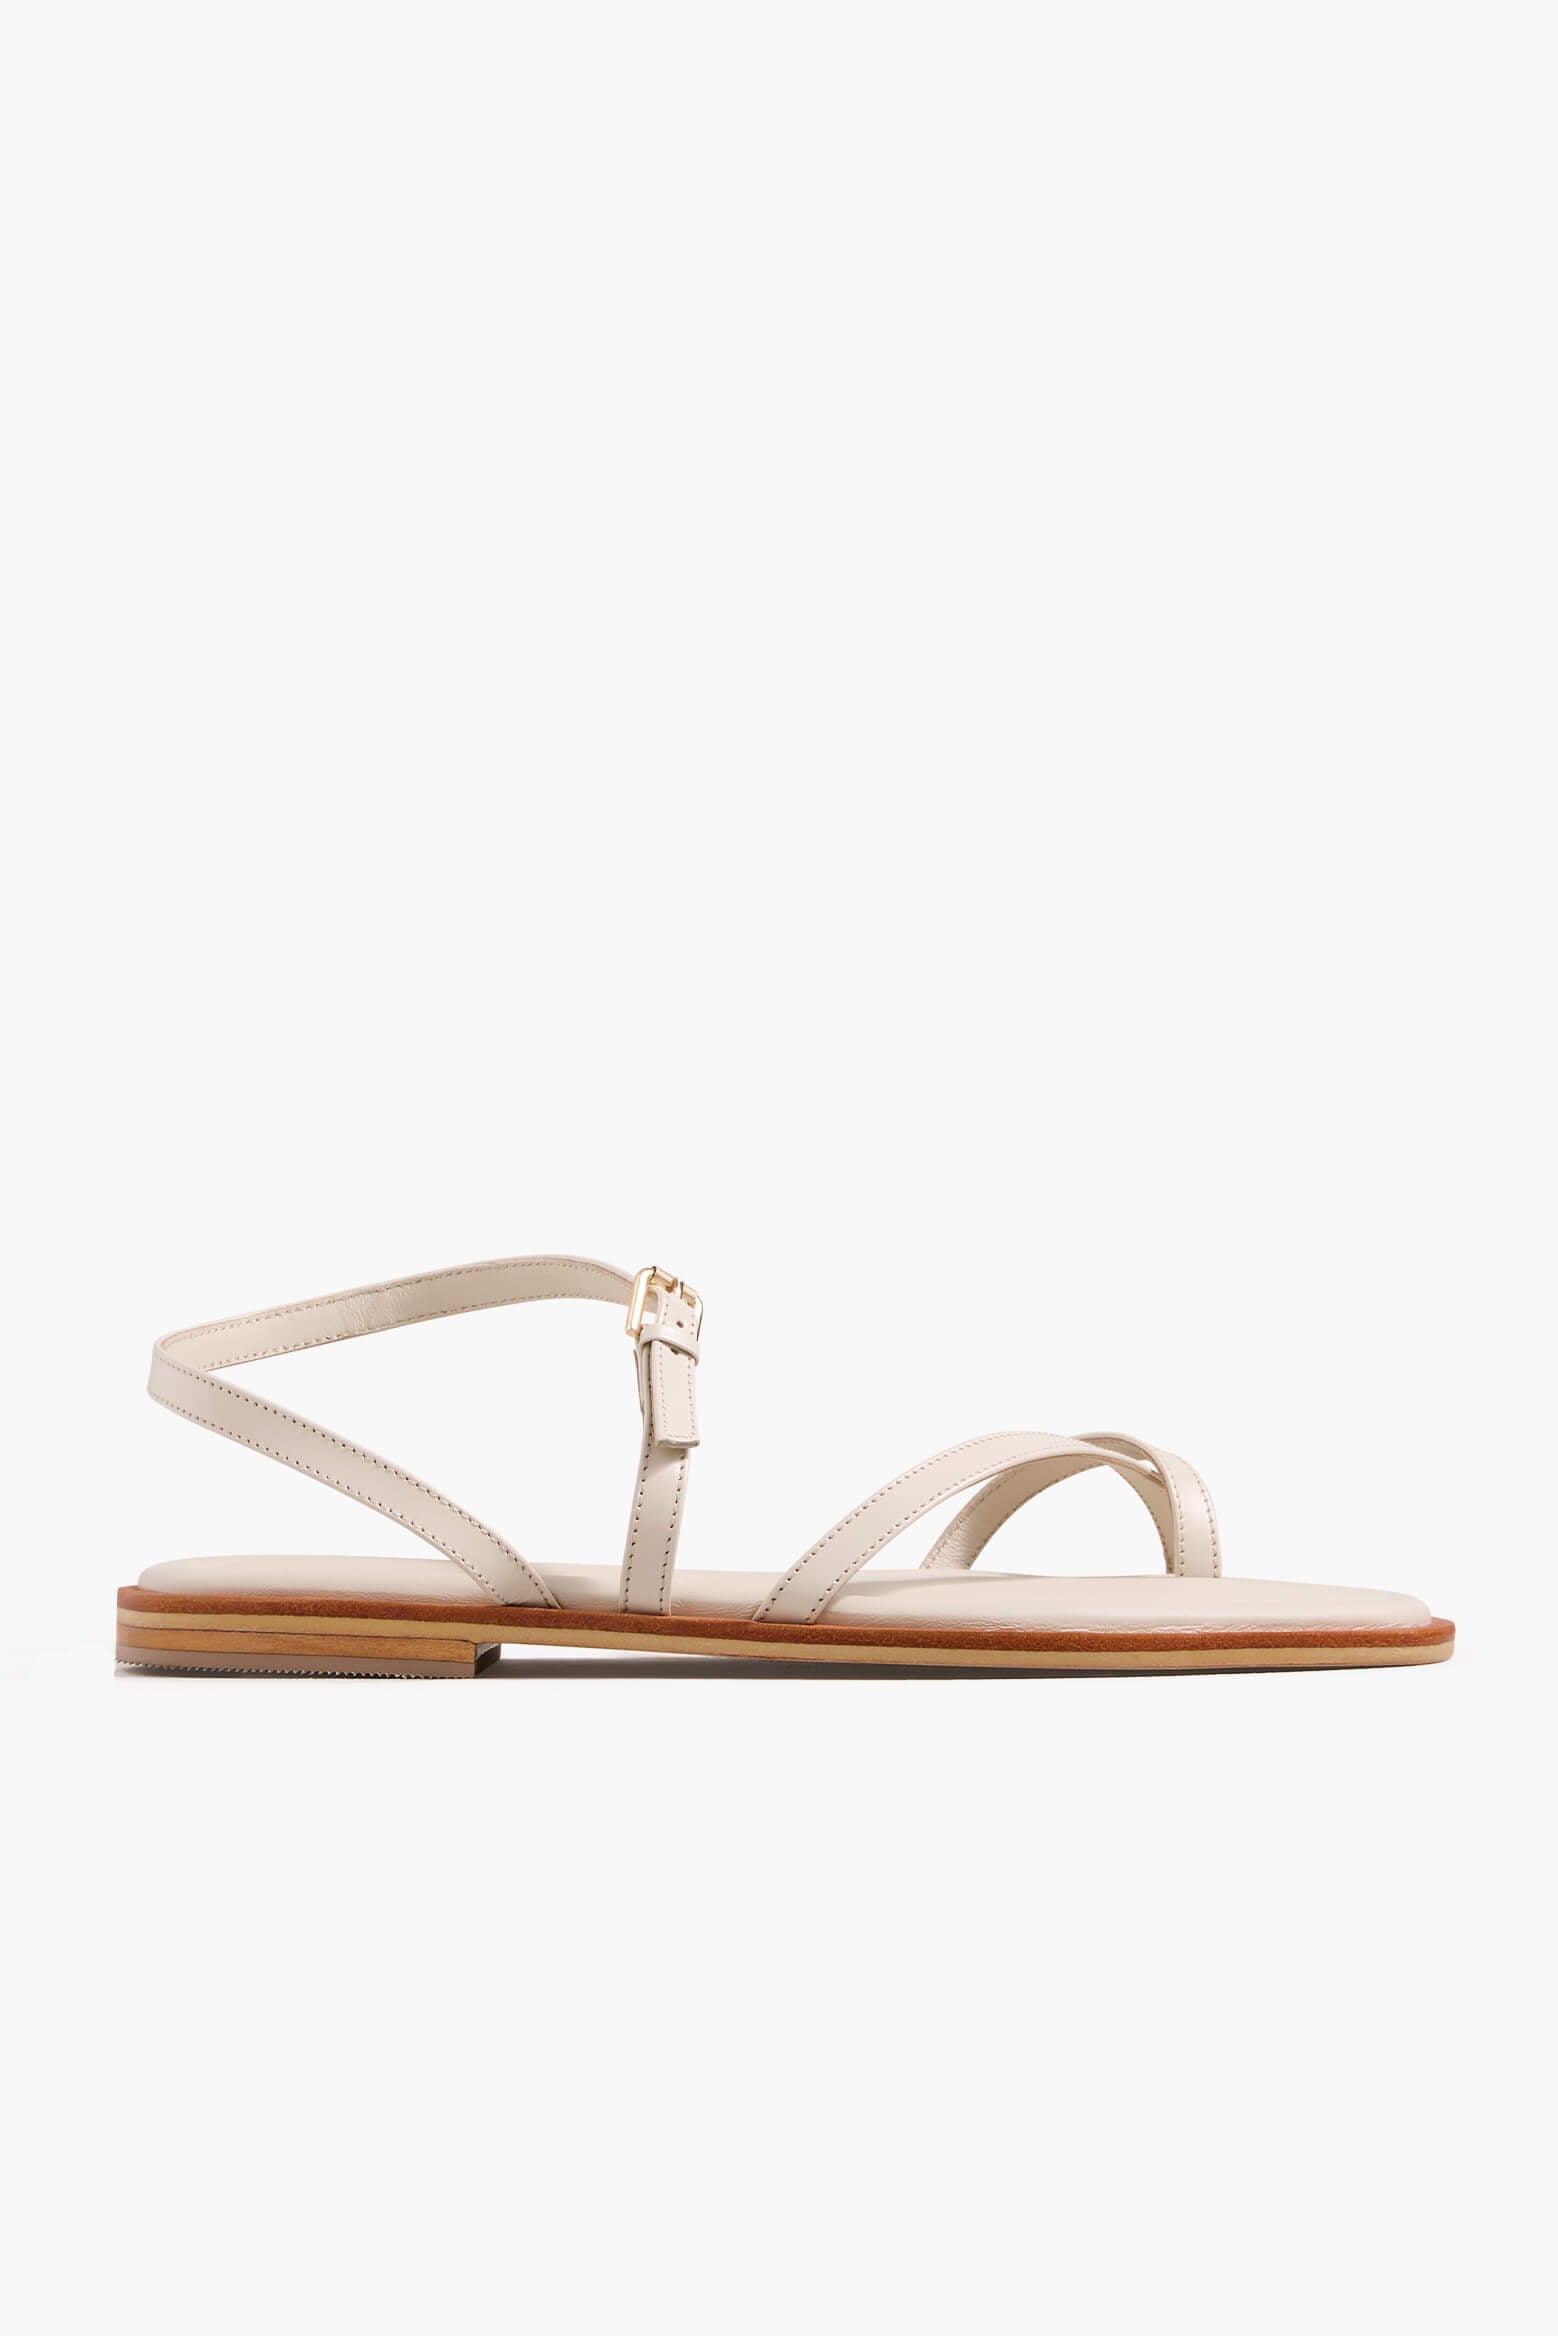 A.EMERY Lucia Sandal in Eggshell | The New Trend